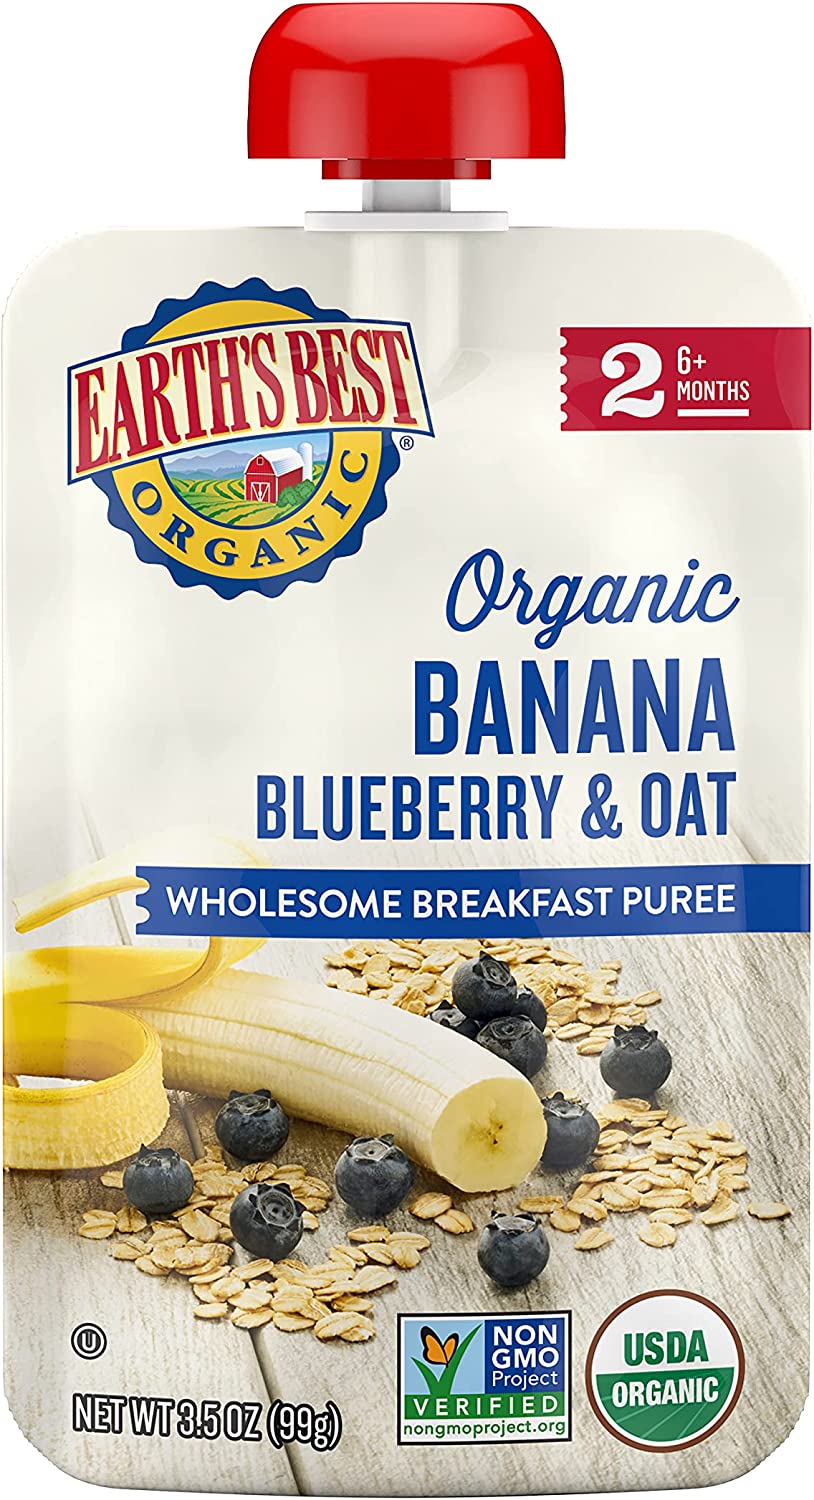 Earth’s Best Organic Baby Food Pouches, Stage 2 Wholesome Breakfast Puree for Babies 6 Months and Older, Organic Banana Blueberry and Oat Puree, 3.5 oz Resealable Pouch (Pack of 12)